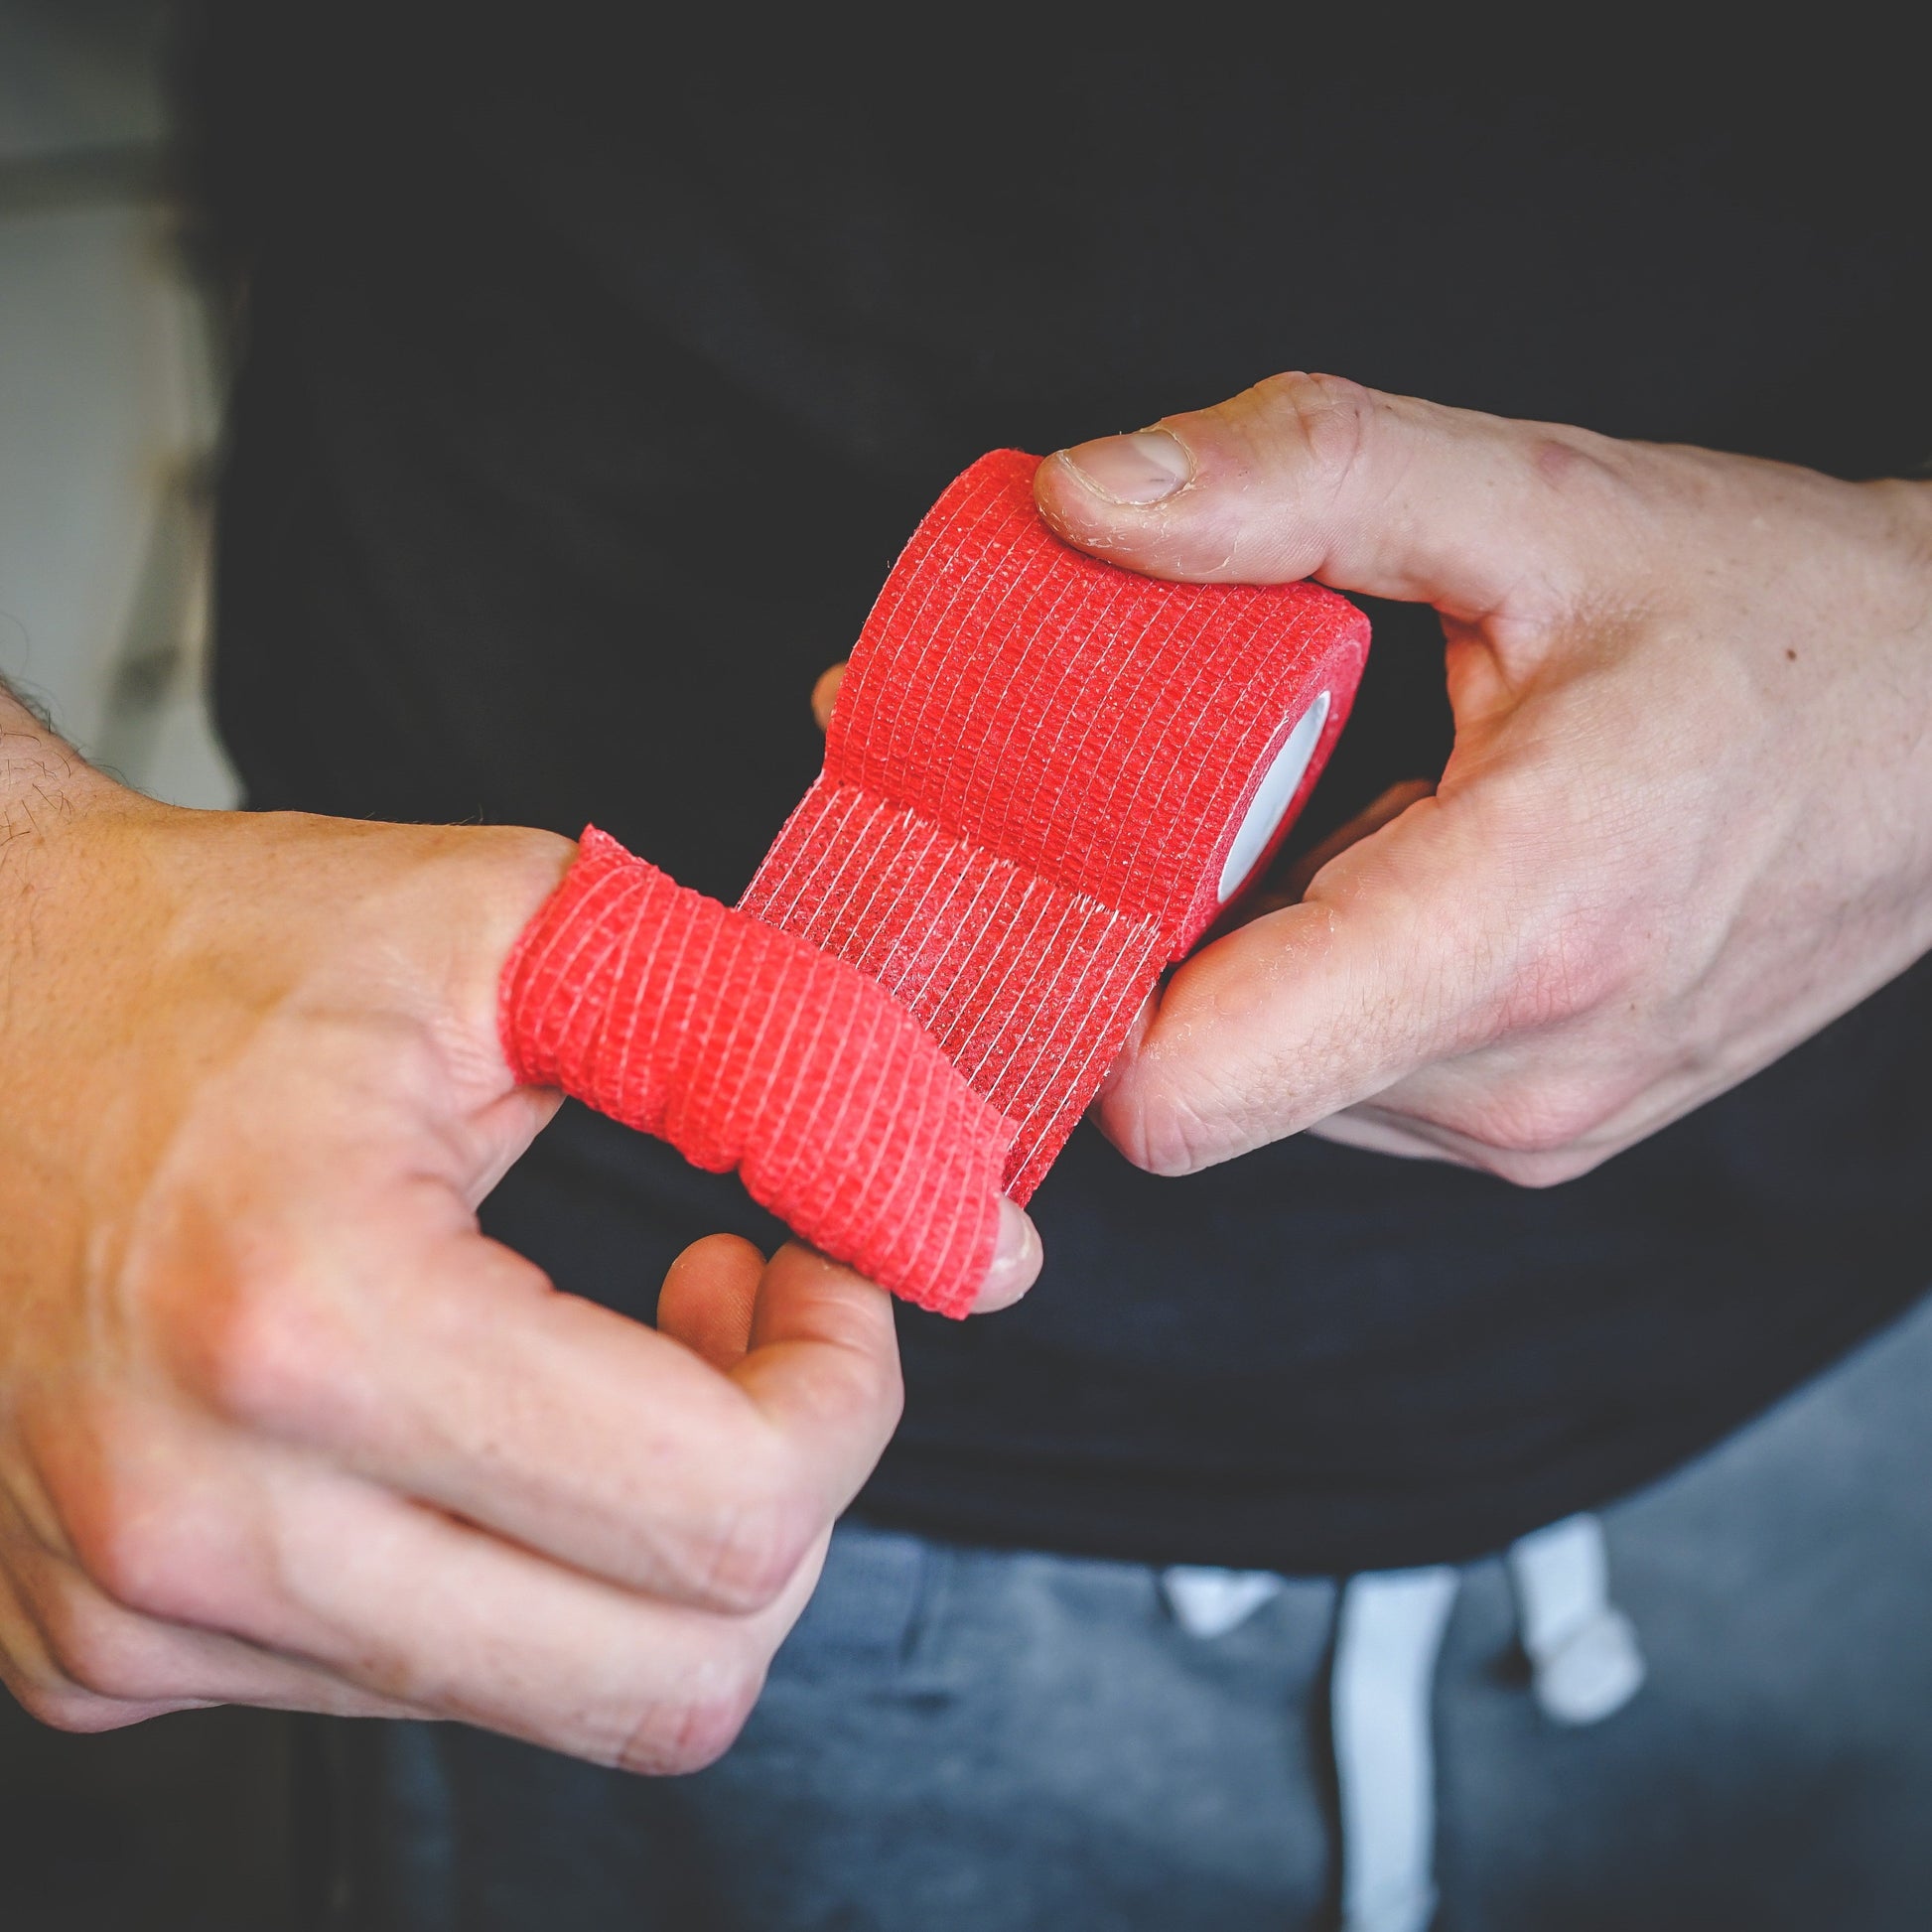 Thumb tape, weight lifting, crossfit